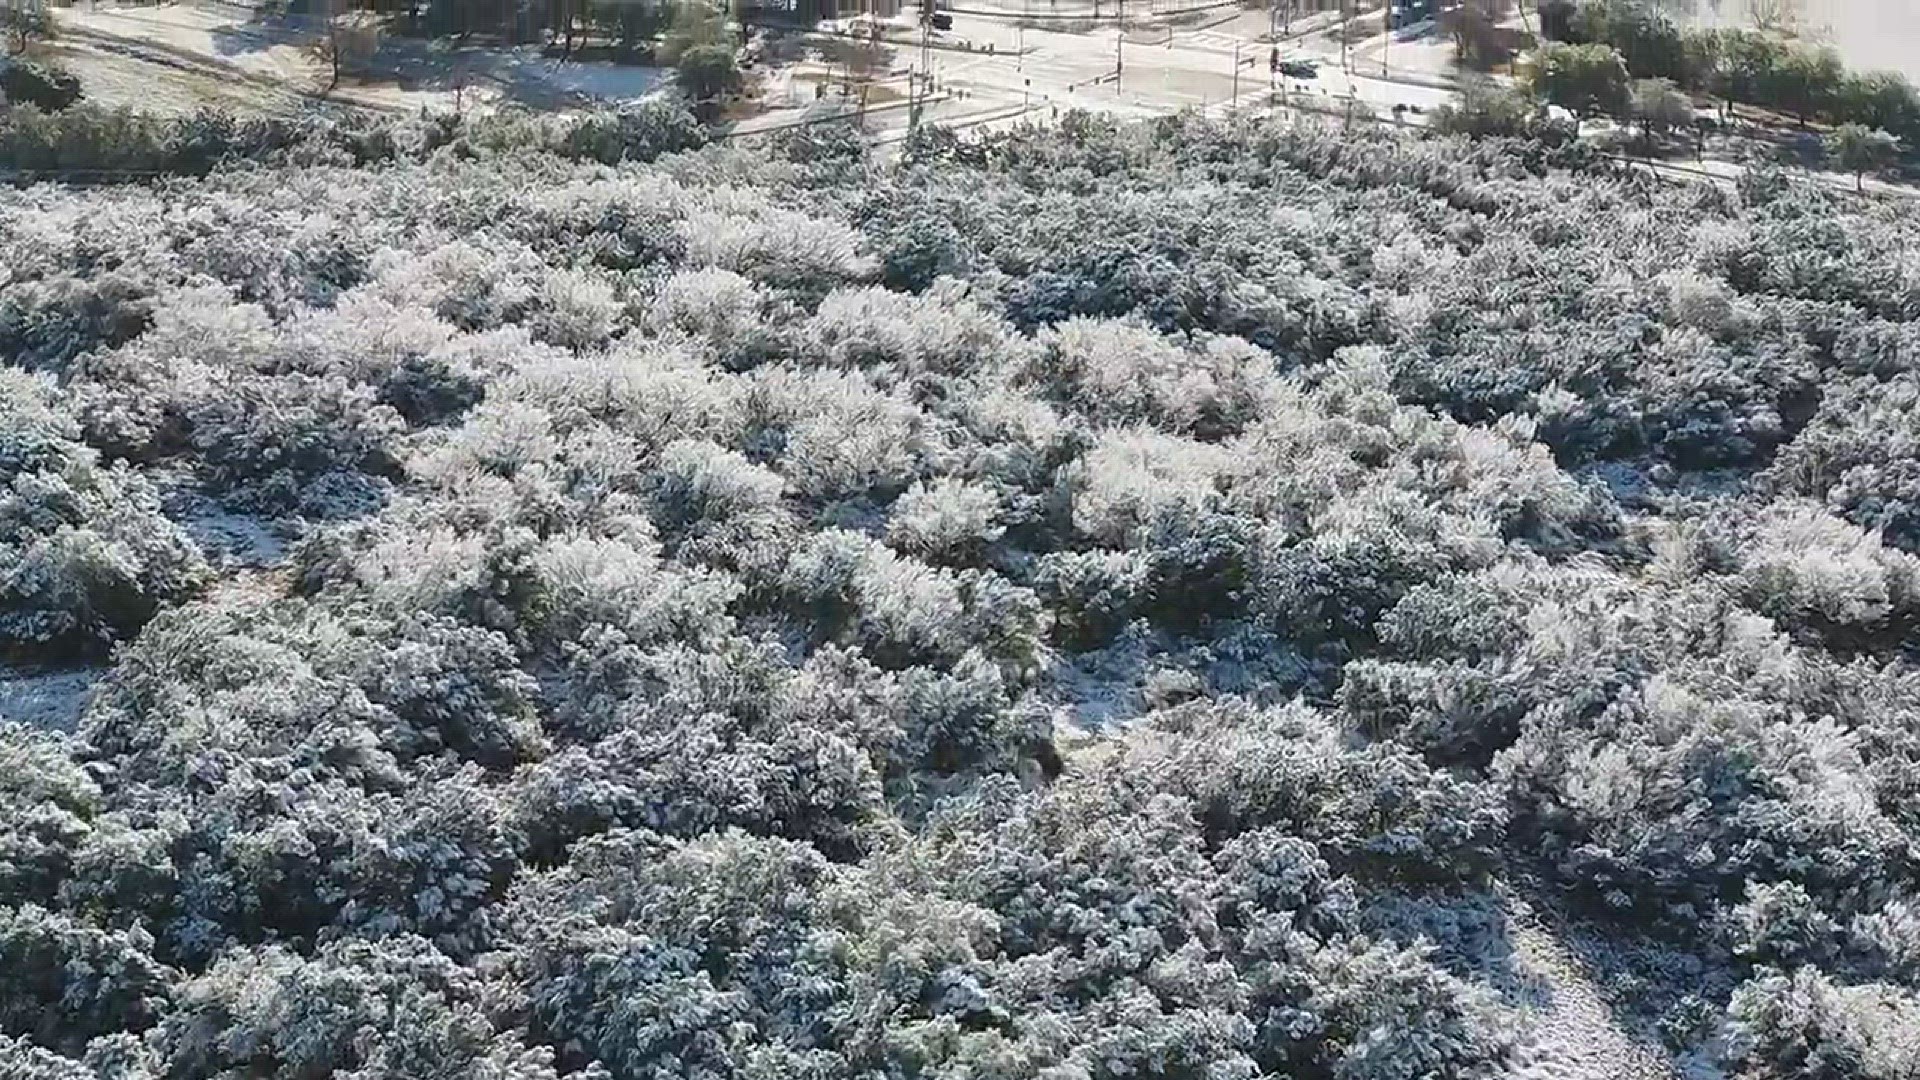 Drone video reveals a winter wonderland after snow fell overnight in San Antonio.